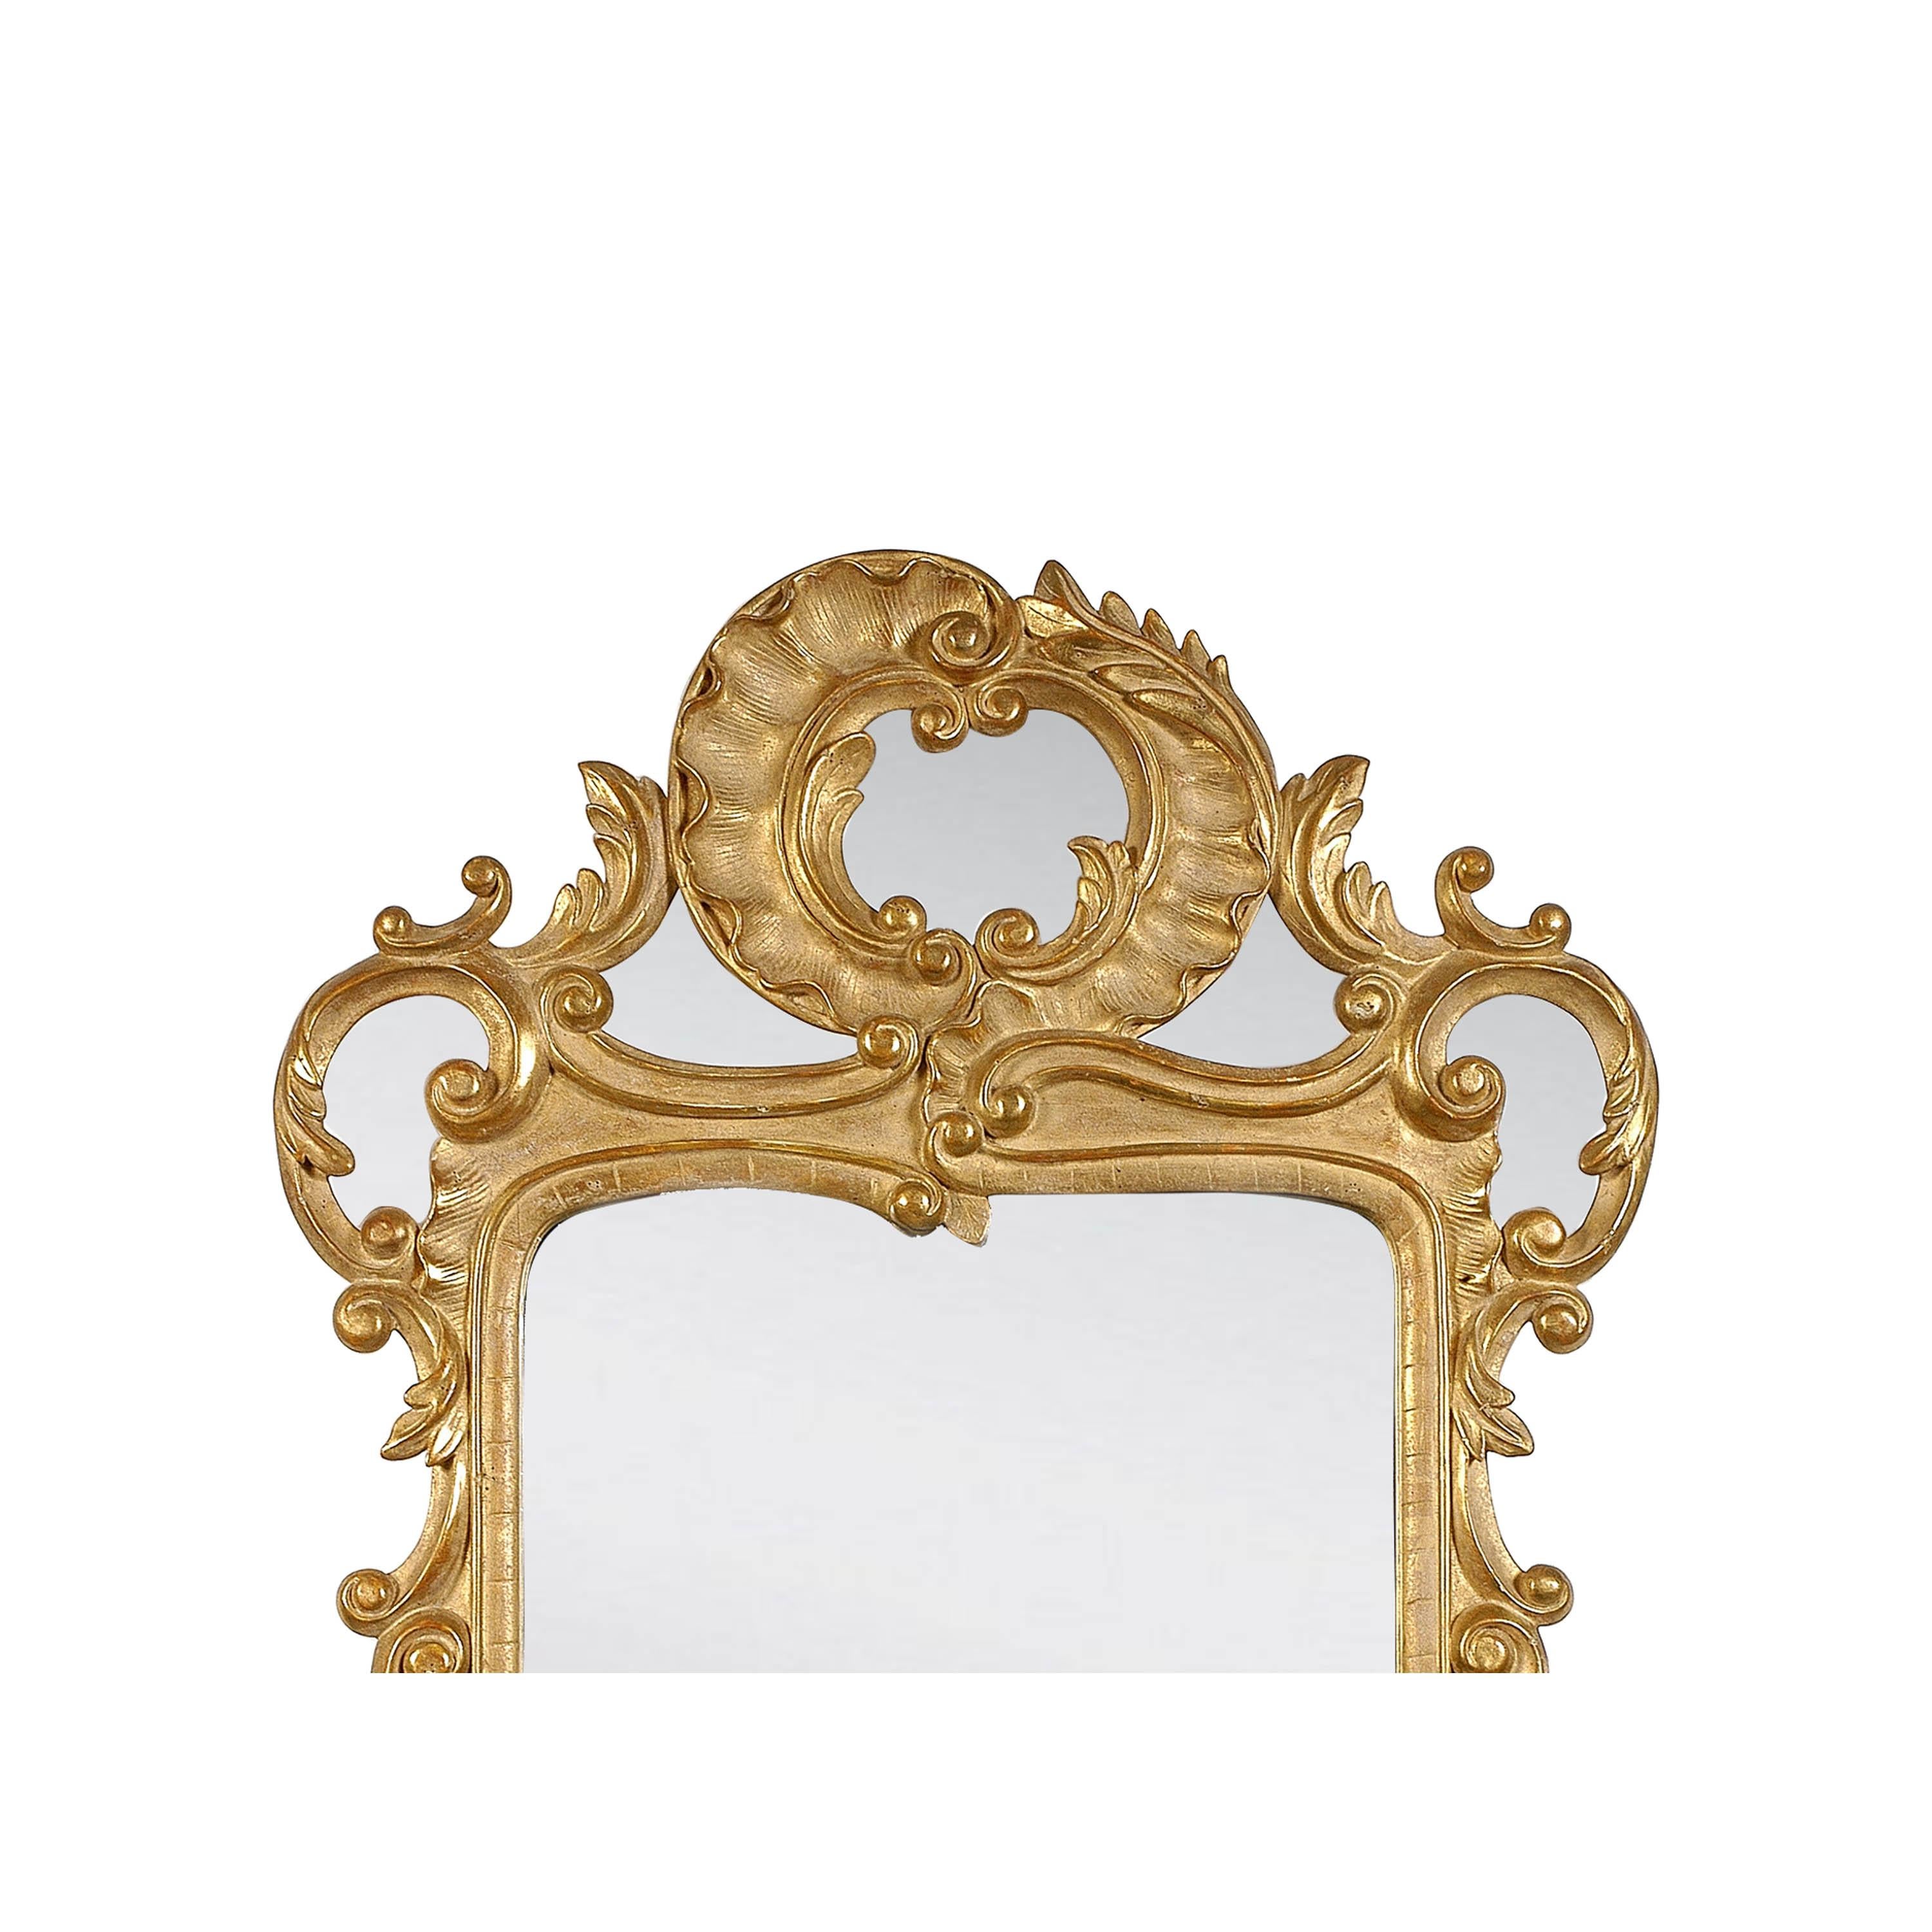 Neoclassical Baroque style handcrafted mirror. Rectangular hand carved wooden structure with gold foil finished, Spain, 1970.